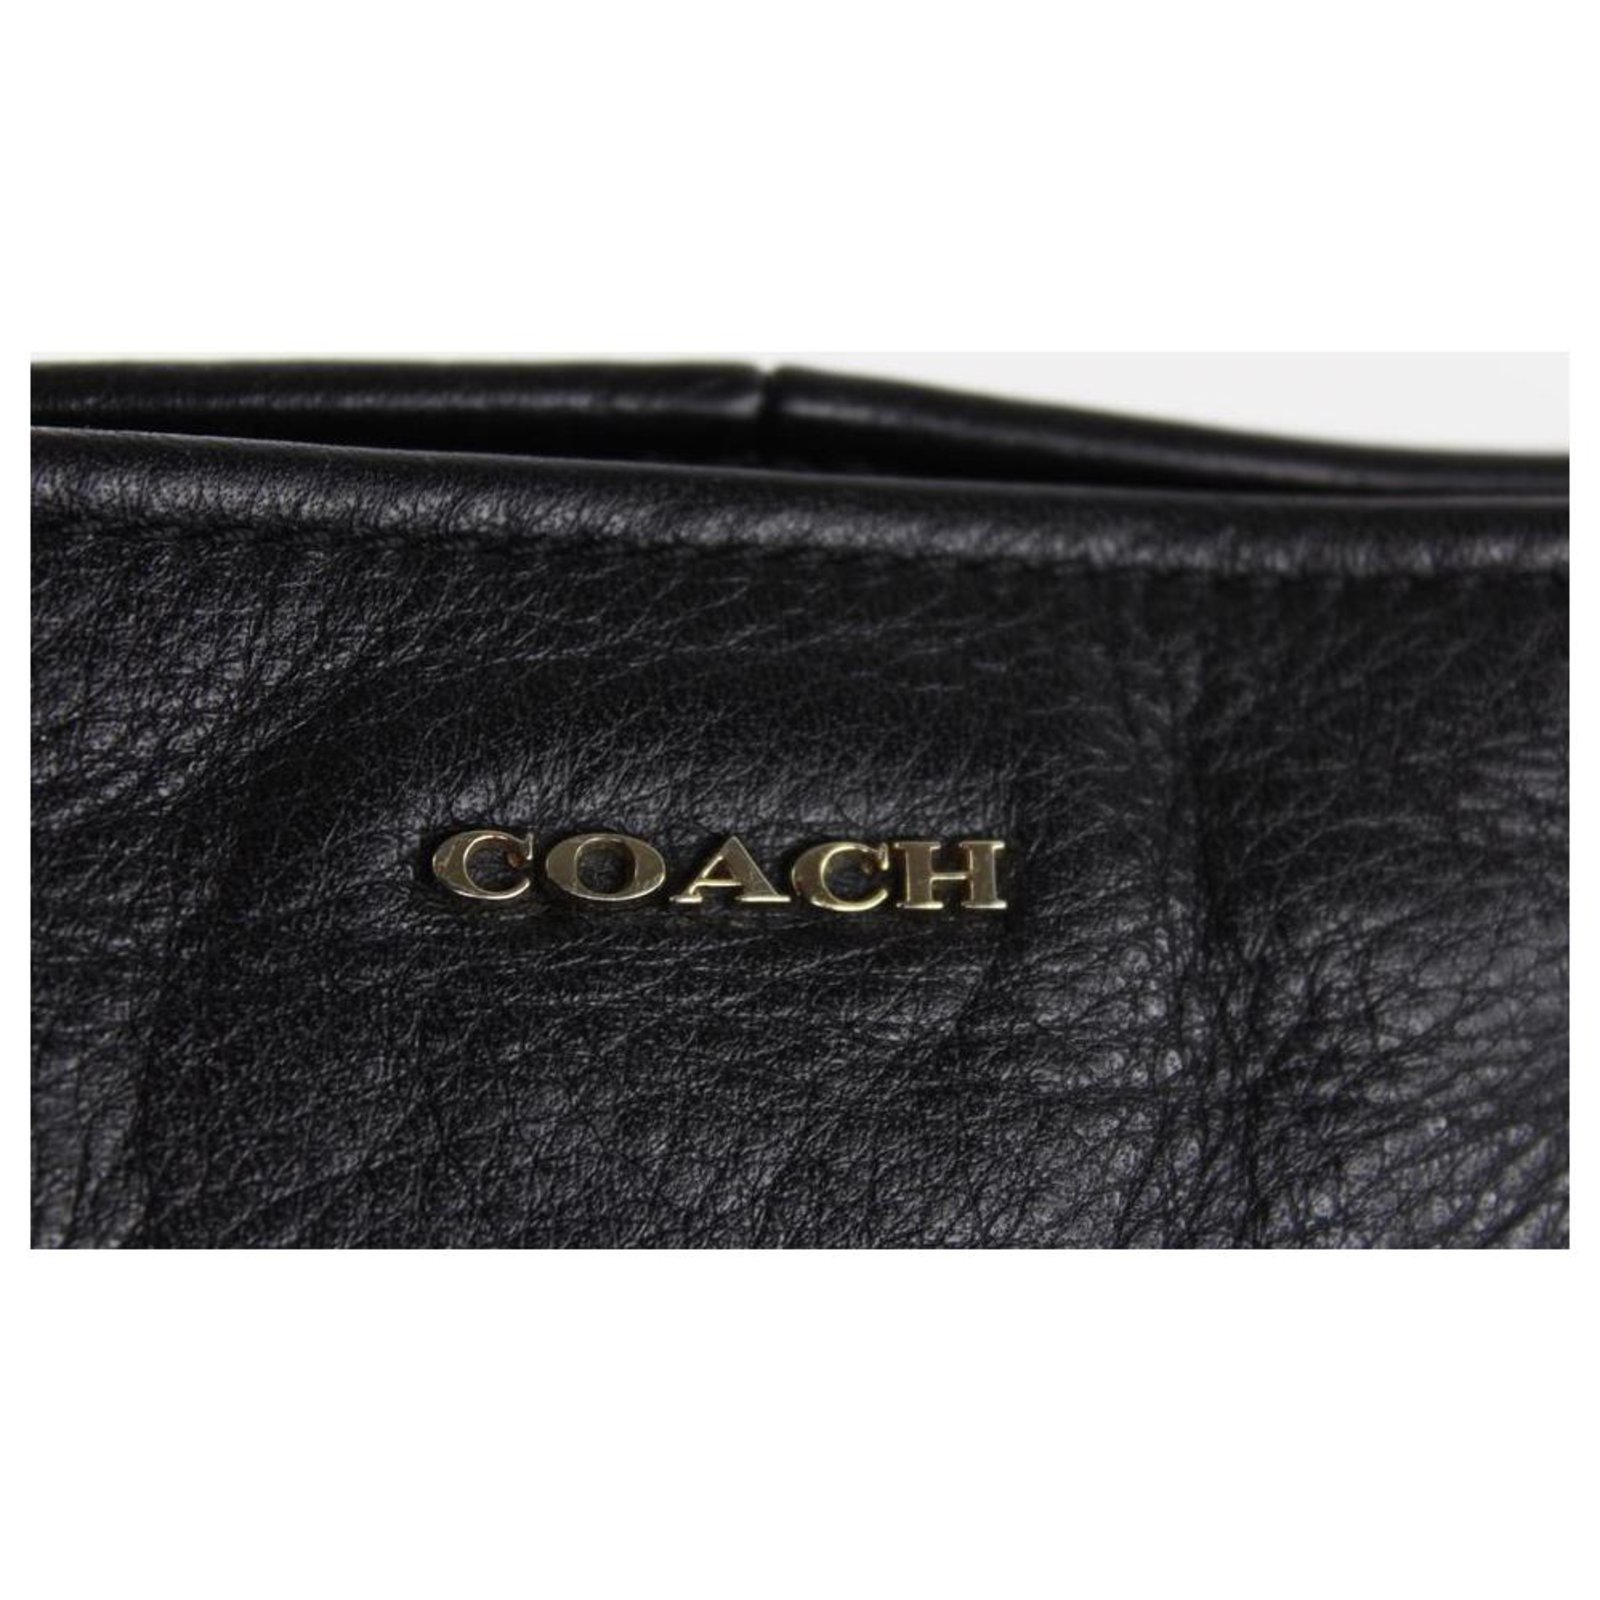 Coach East West Chain Tote Bag